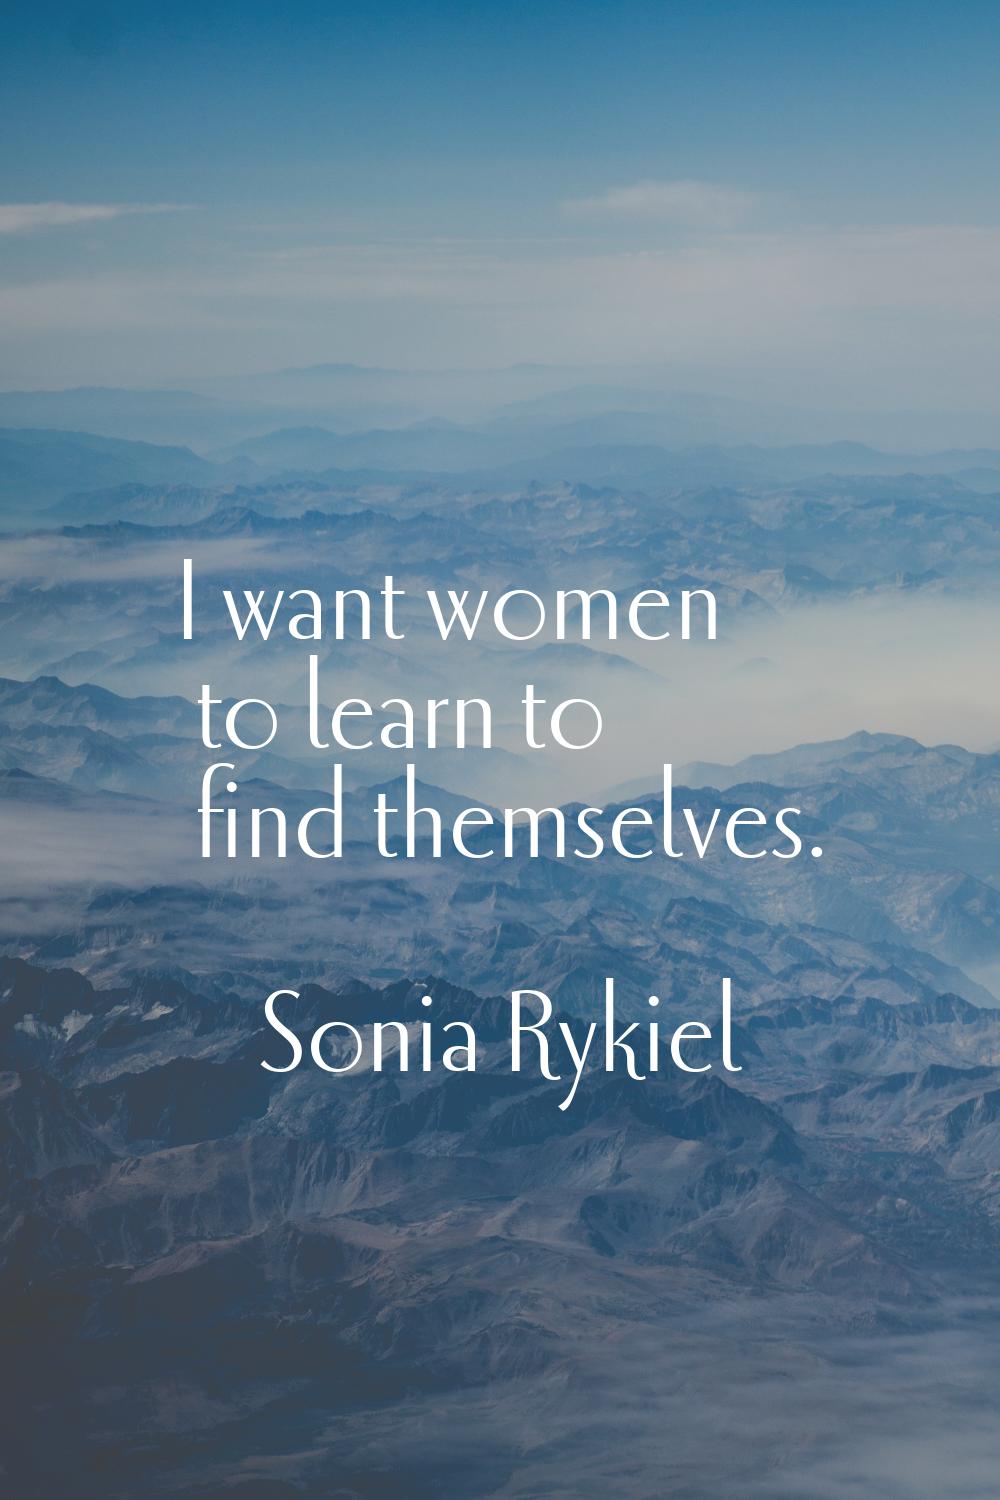 I want women to learn to find themselves.